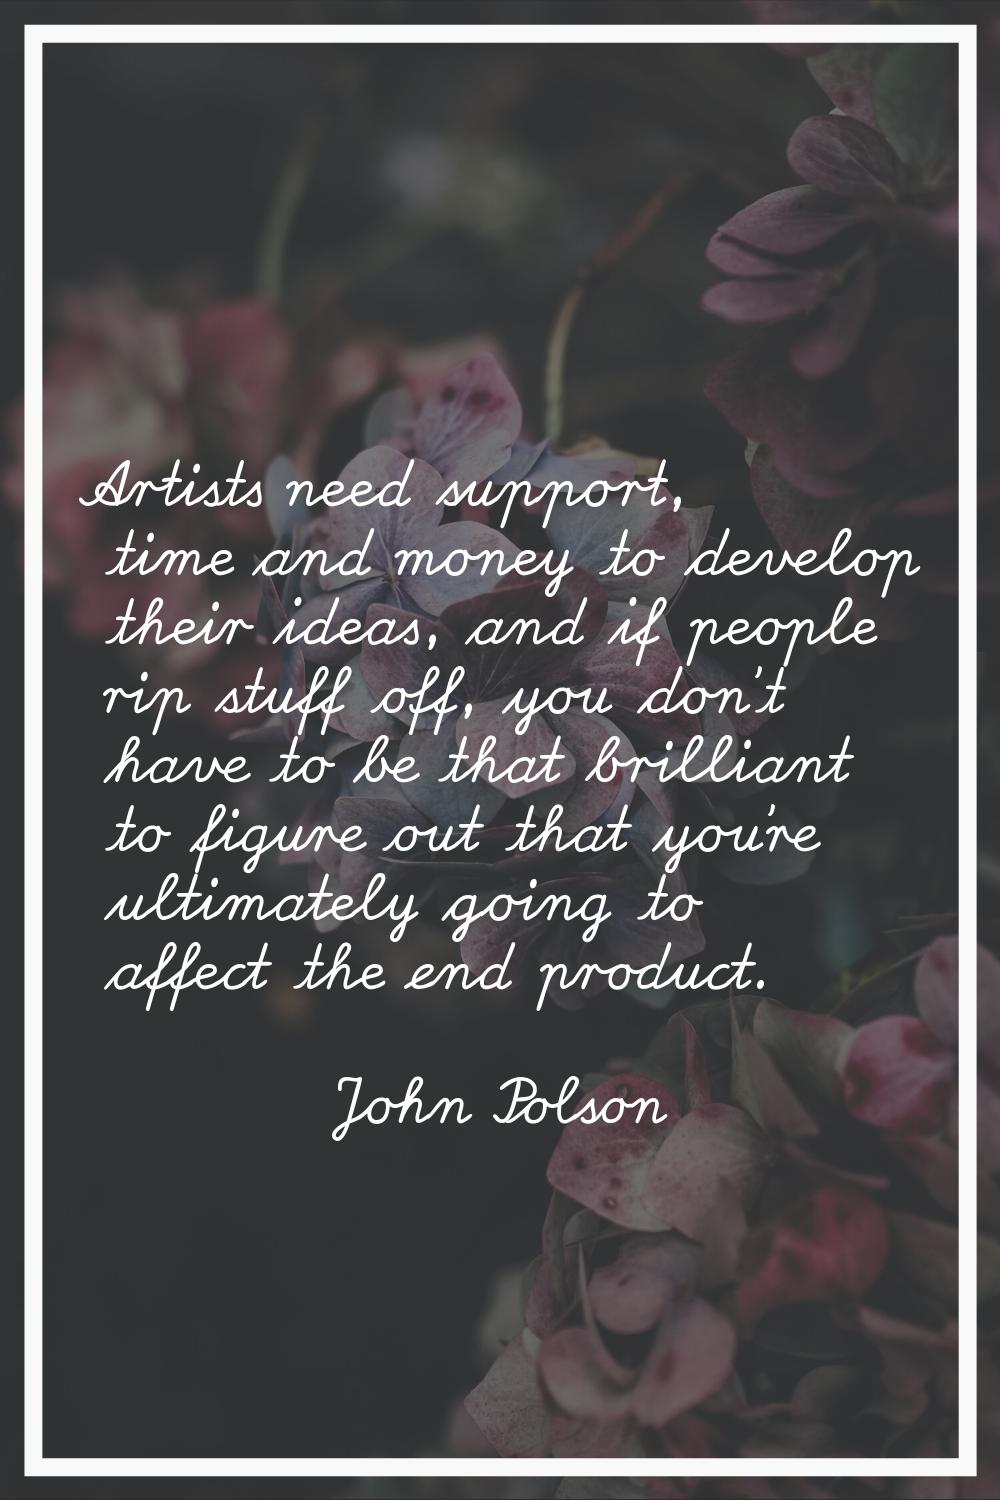 Artists need support, time and money to develop their ideas, and if people rip stuff off, you don't